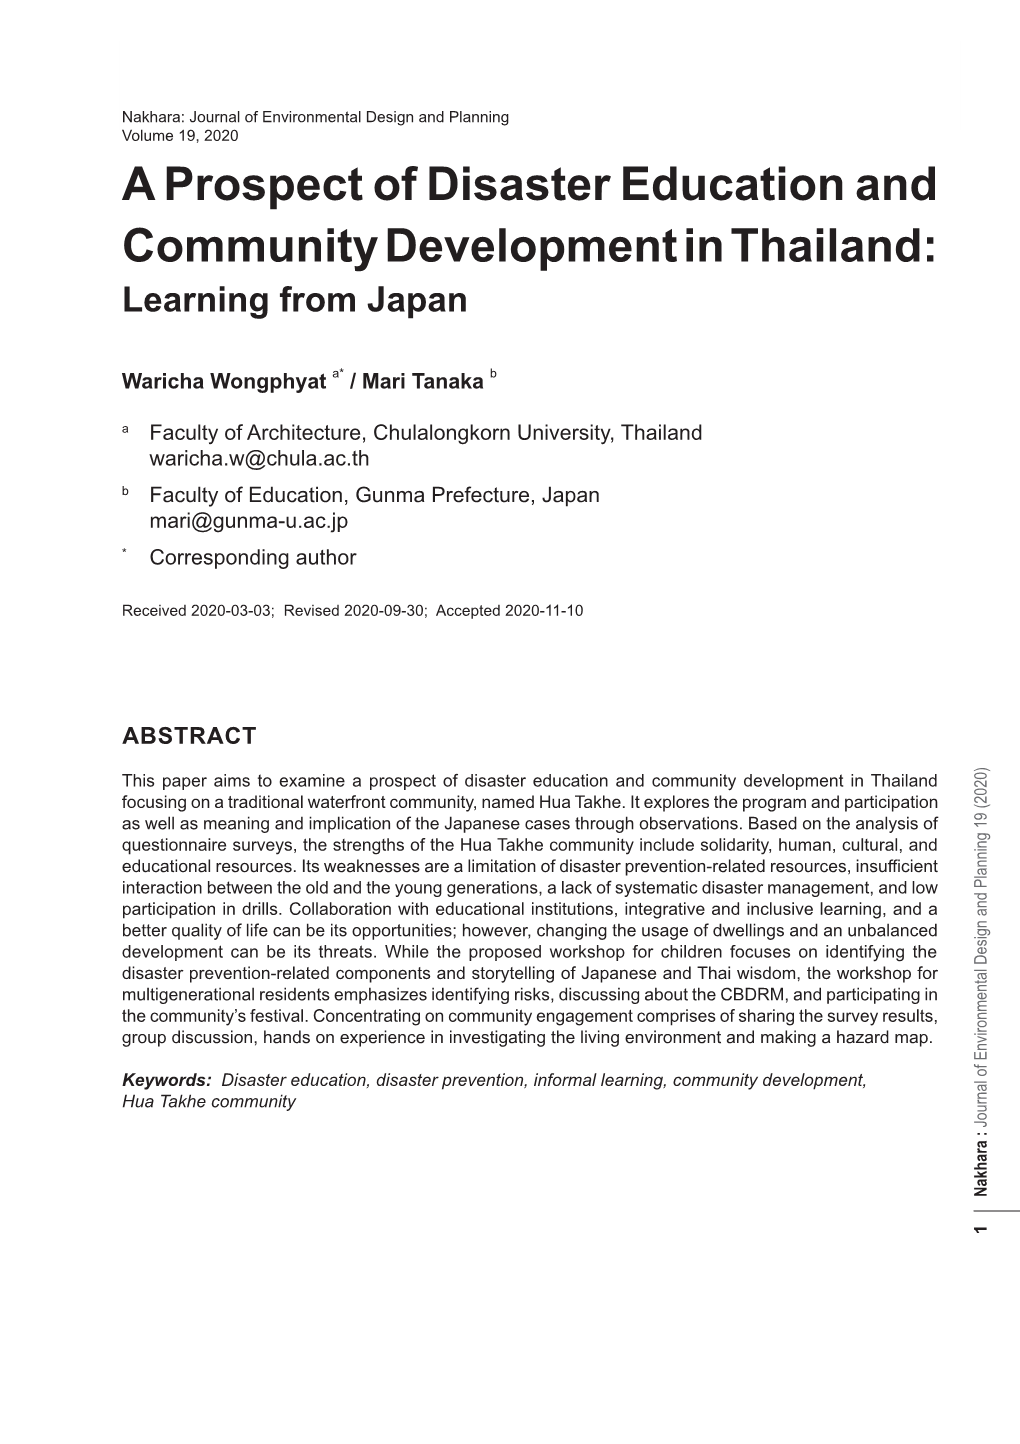 A Prospect of Disaster Education and Community Development in Thailand